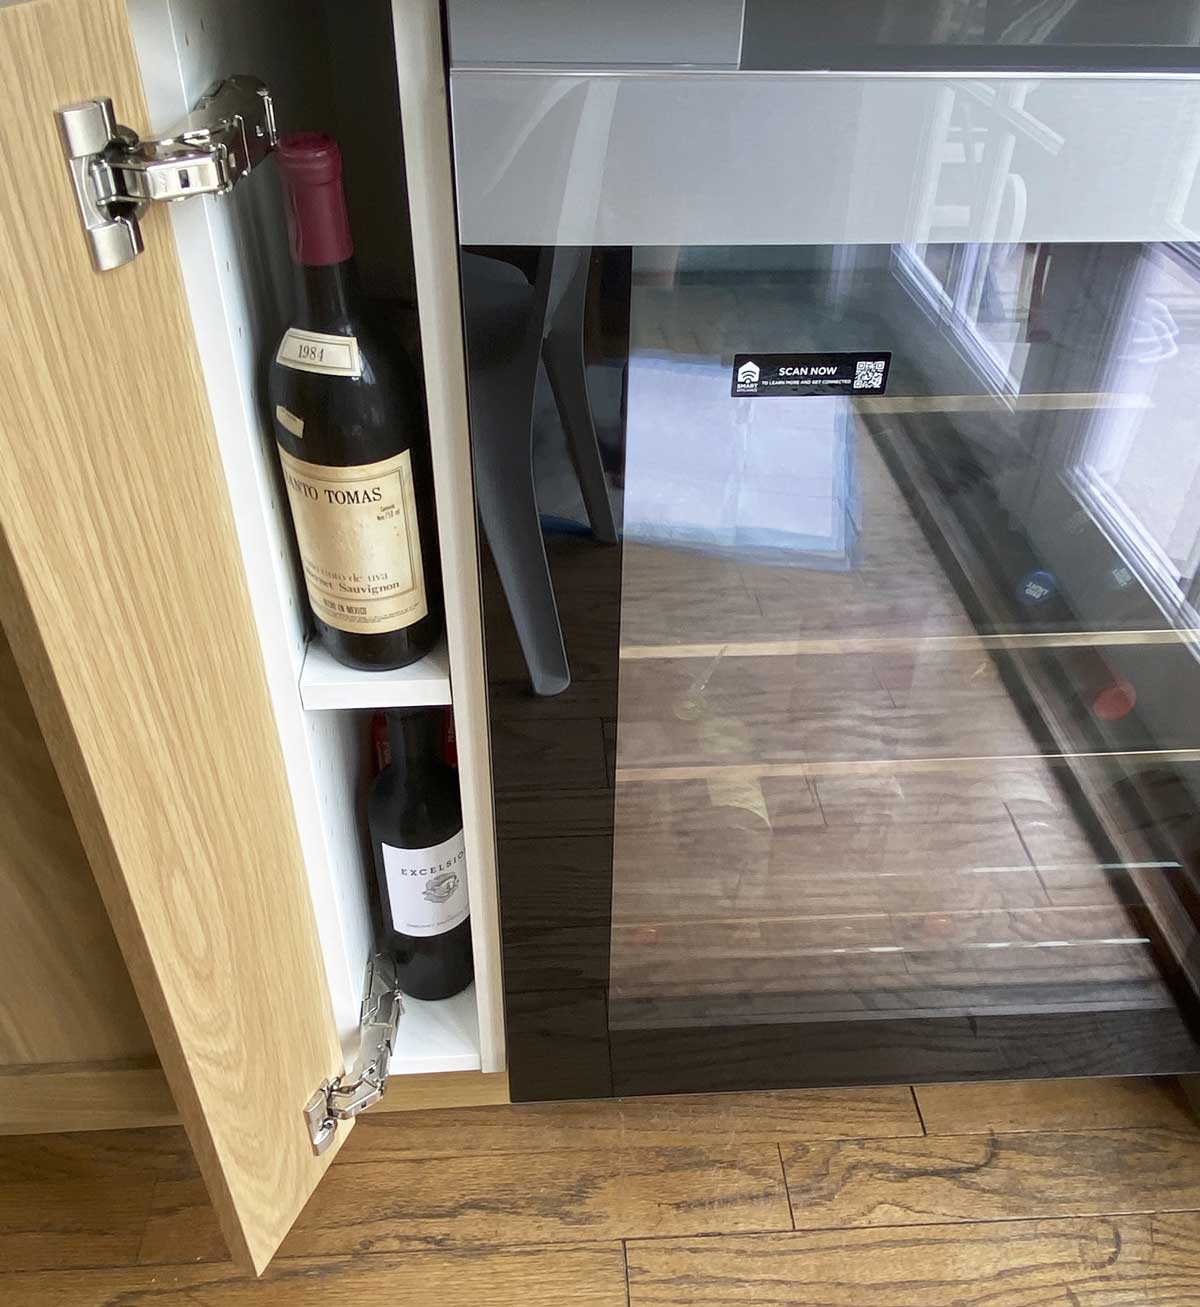 5" cabinet for wine bottles next to the beverage center